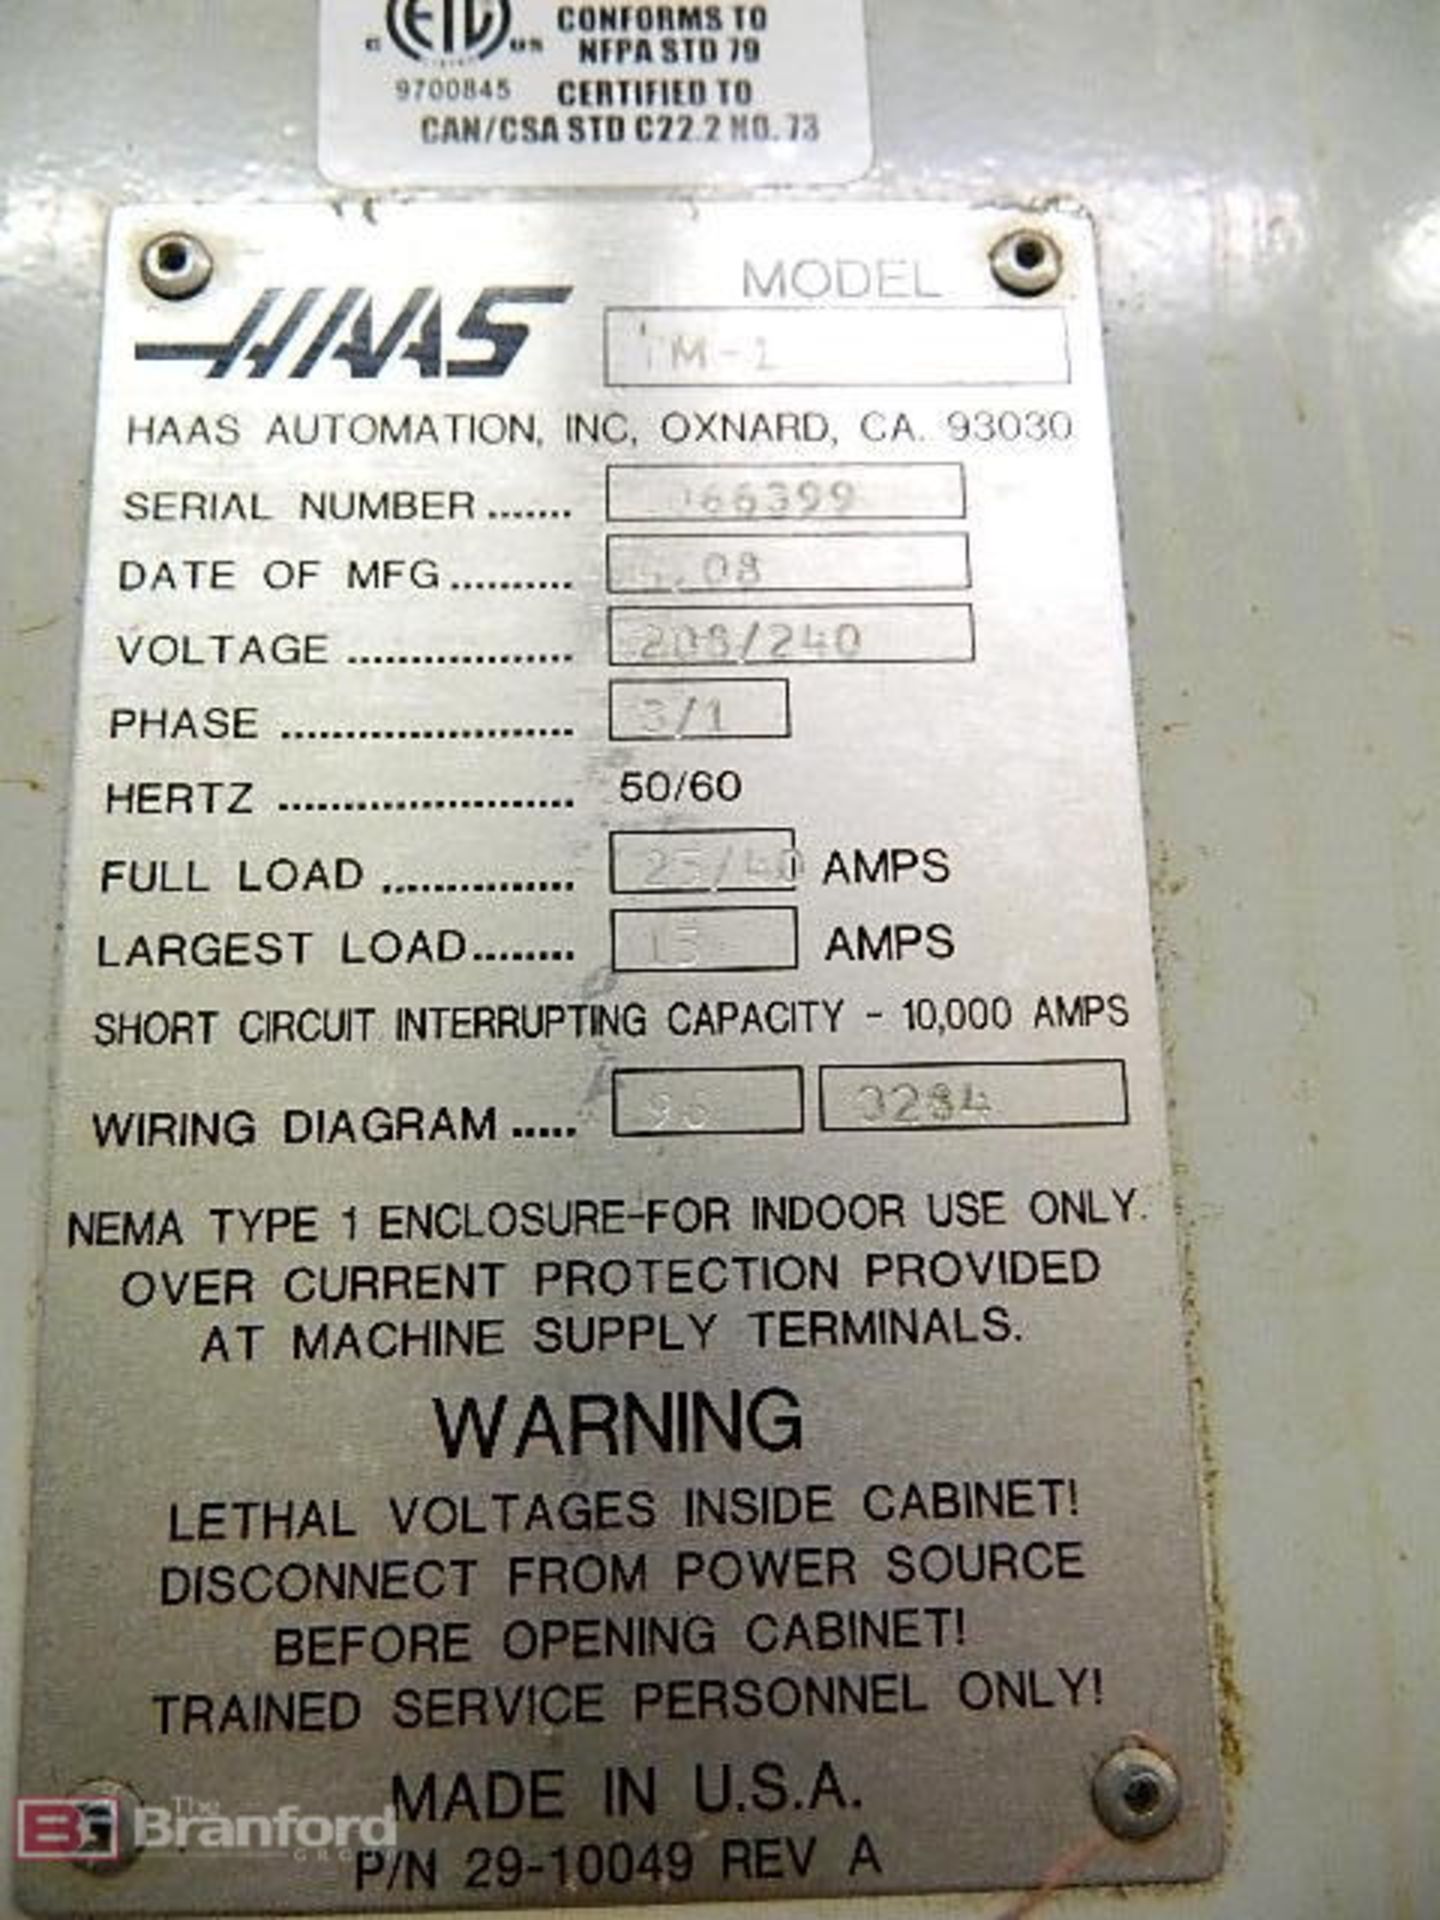 Haas TM-1 (2008) Vertical CNC Mill - Image 6 of 6